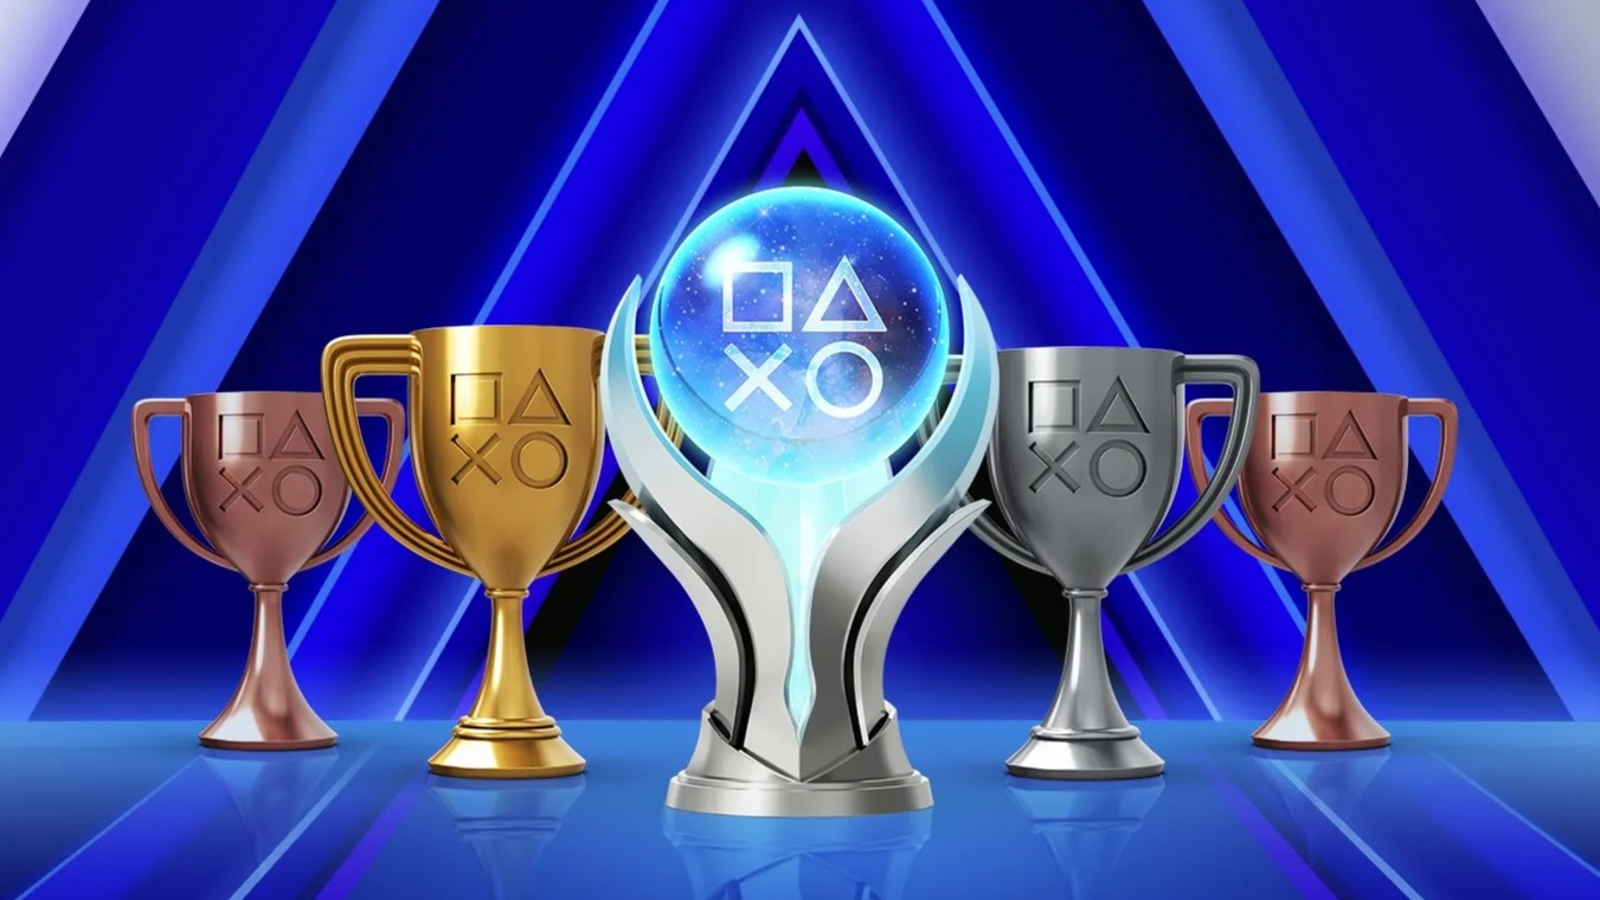 Trophies : On5. We make mobile games.